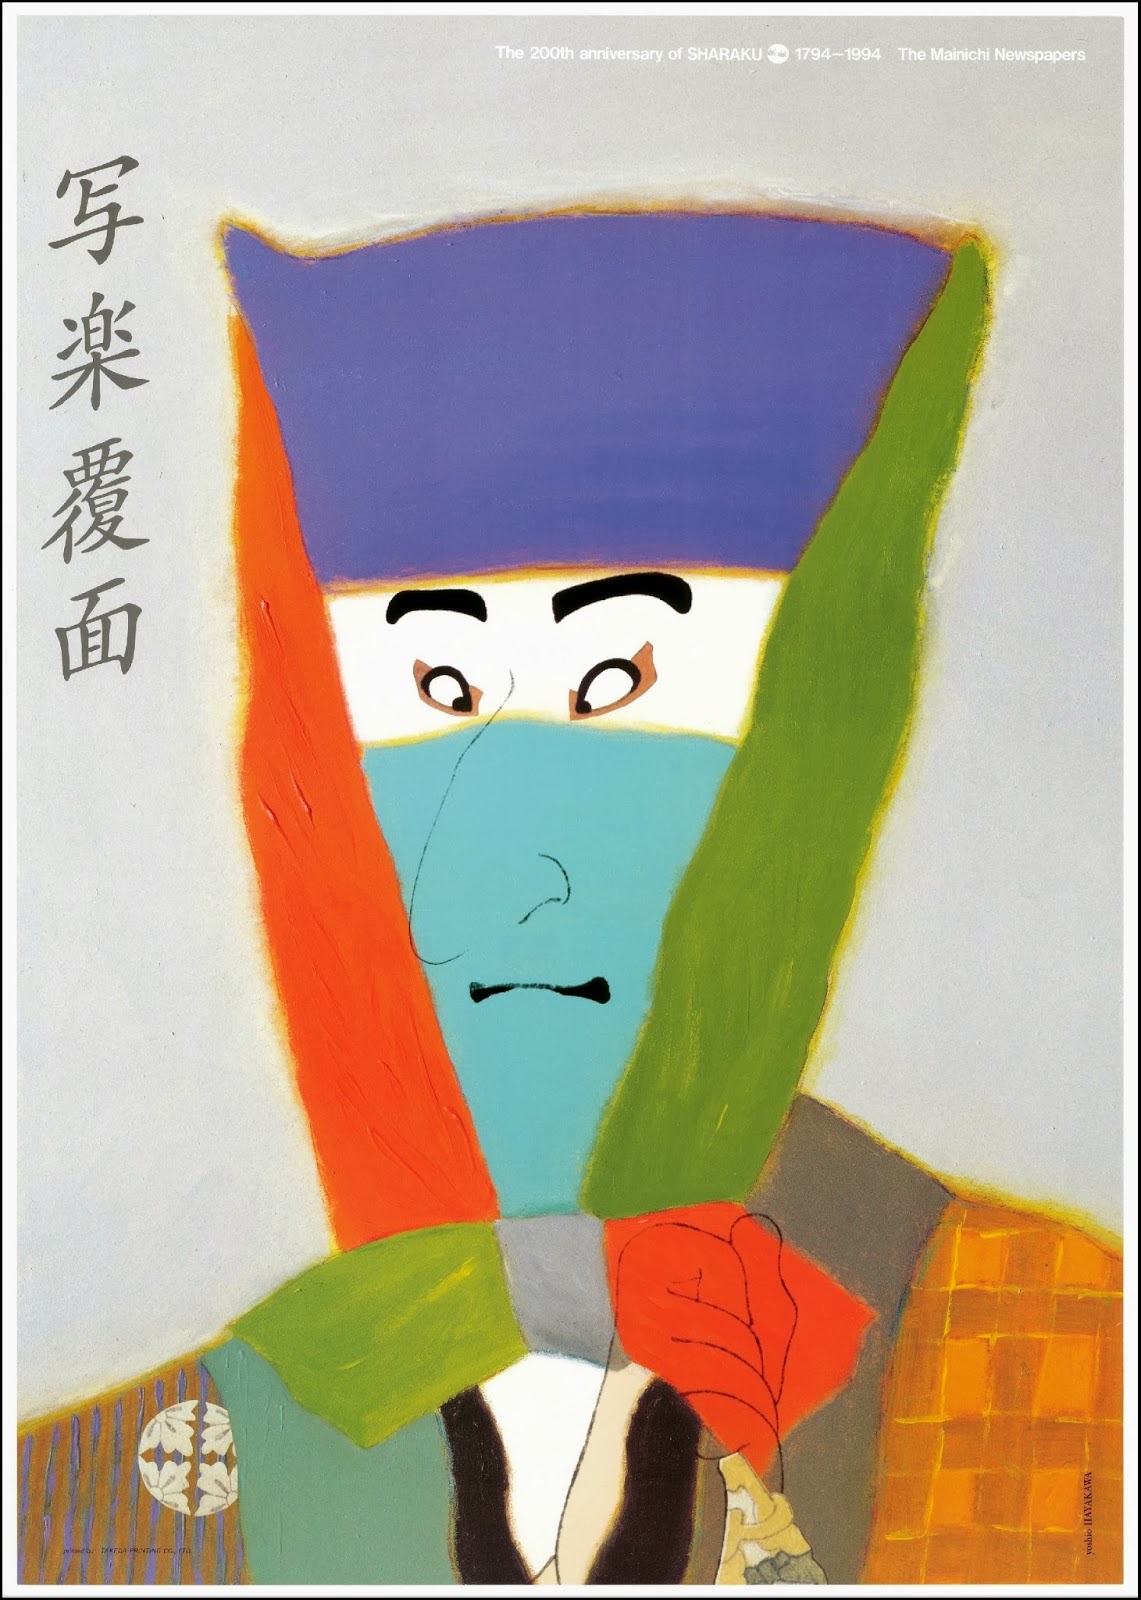 colourful Japanese poster featuring embellished render of grimacing Japanese man in head scarf